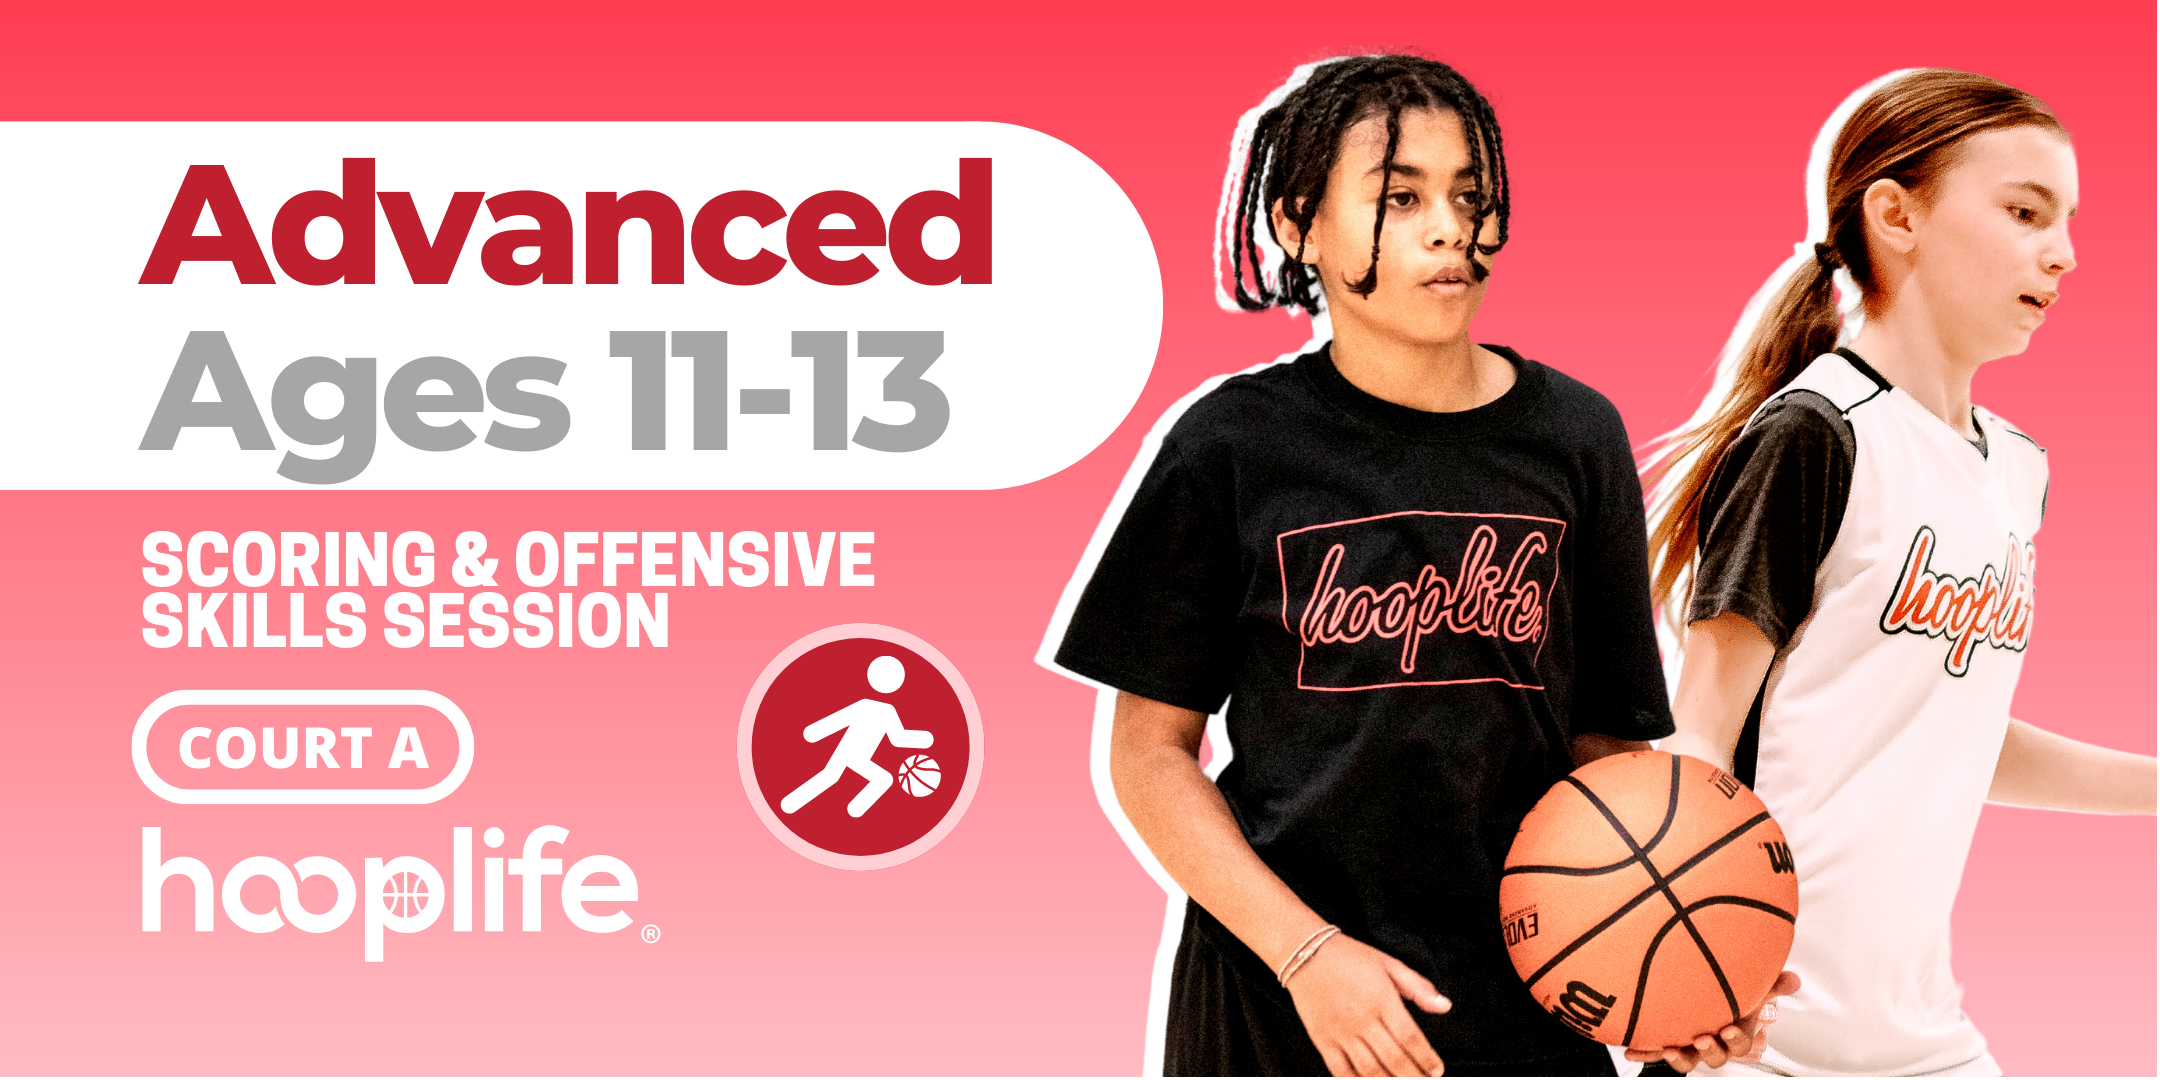 Ages 11-13 Advanced Scoring & Offensive Skills Session